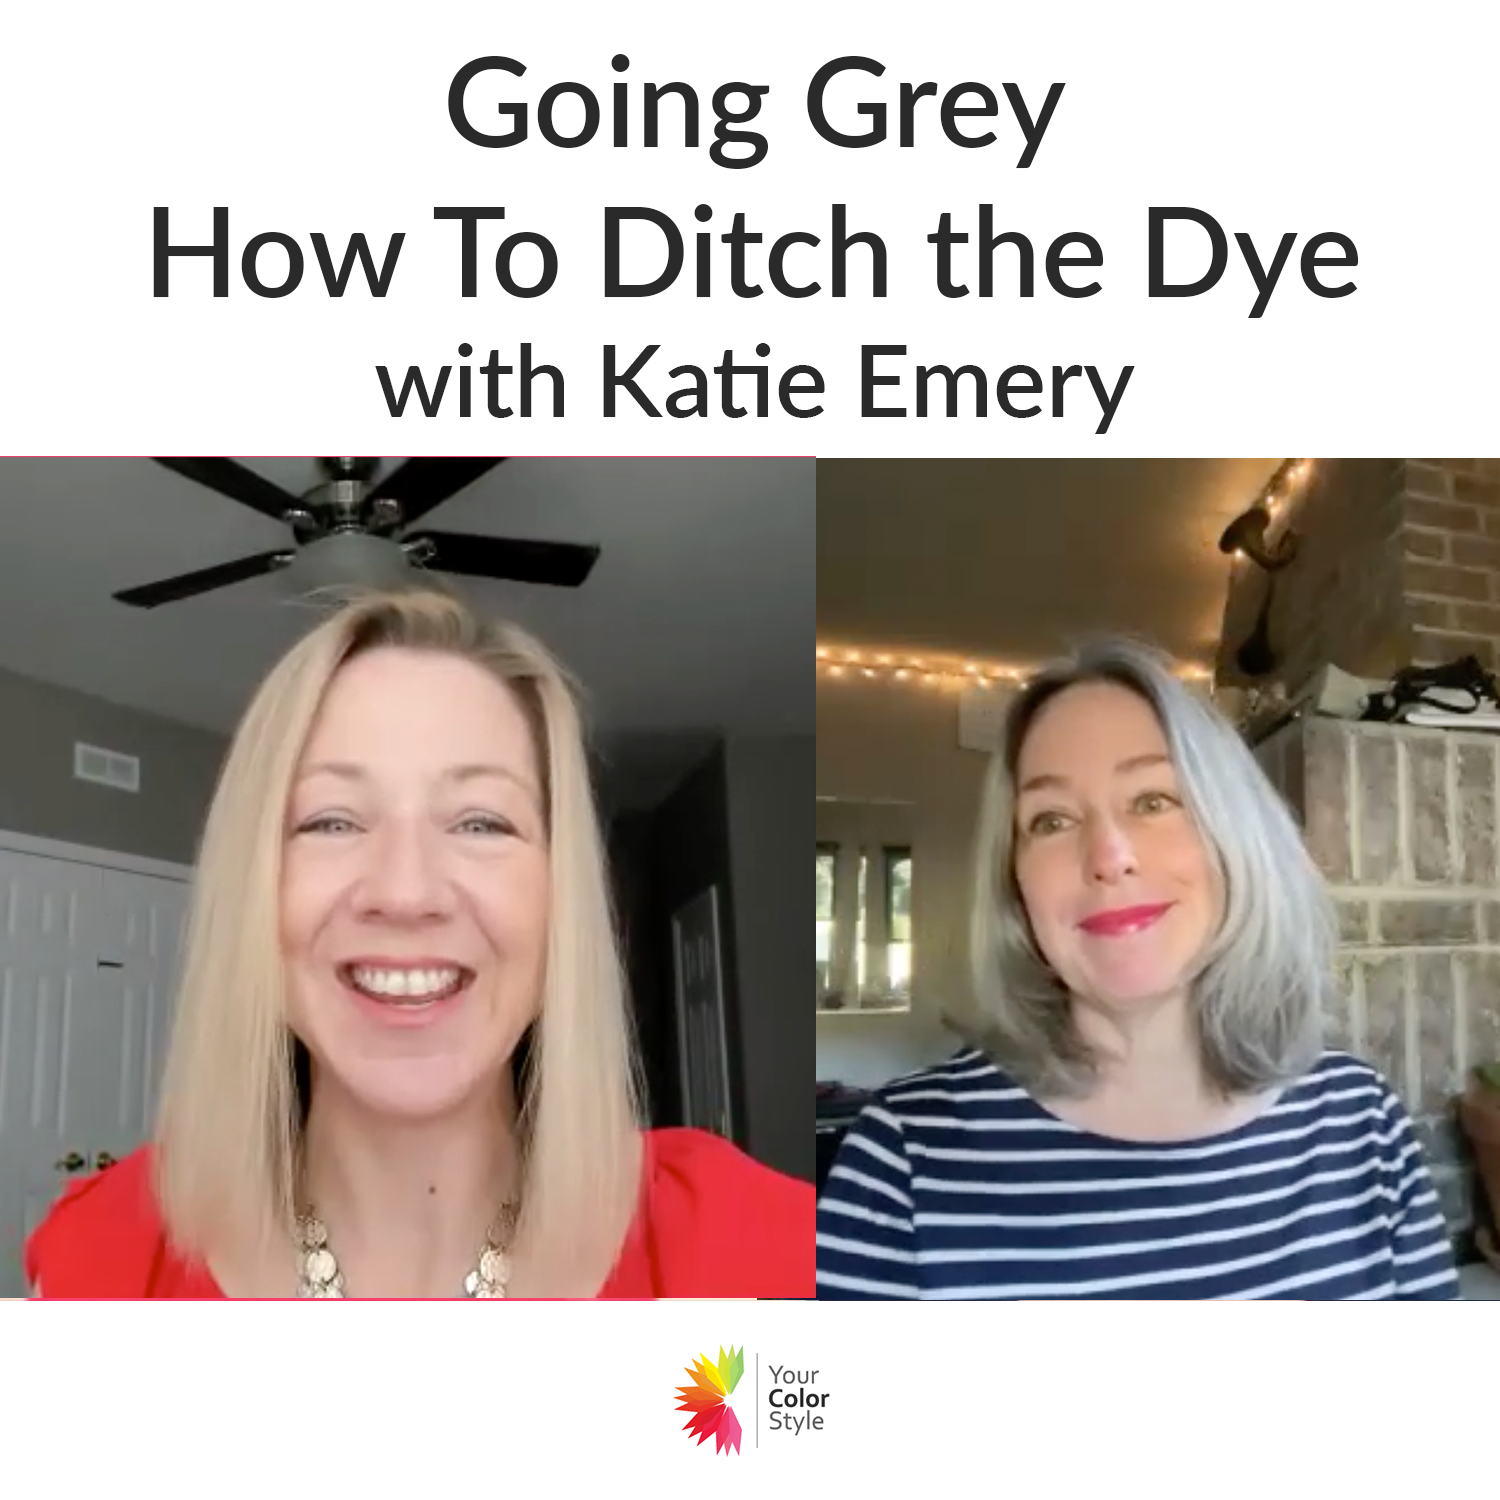 Going Grey - How To Ditch the Dye with Katie Emery